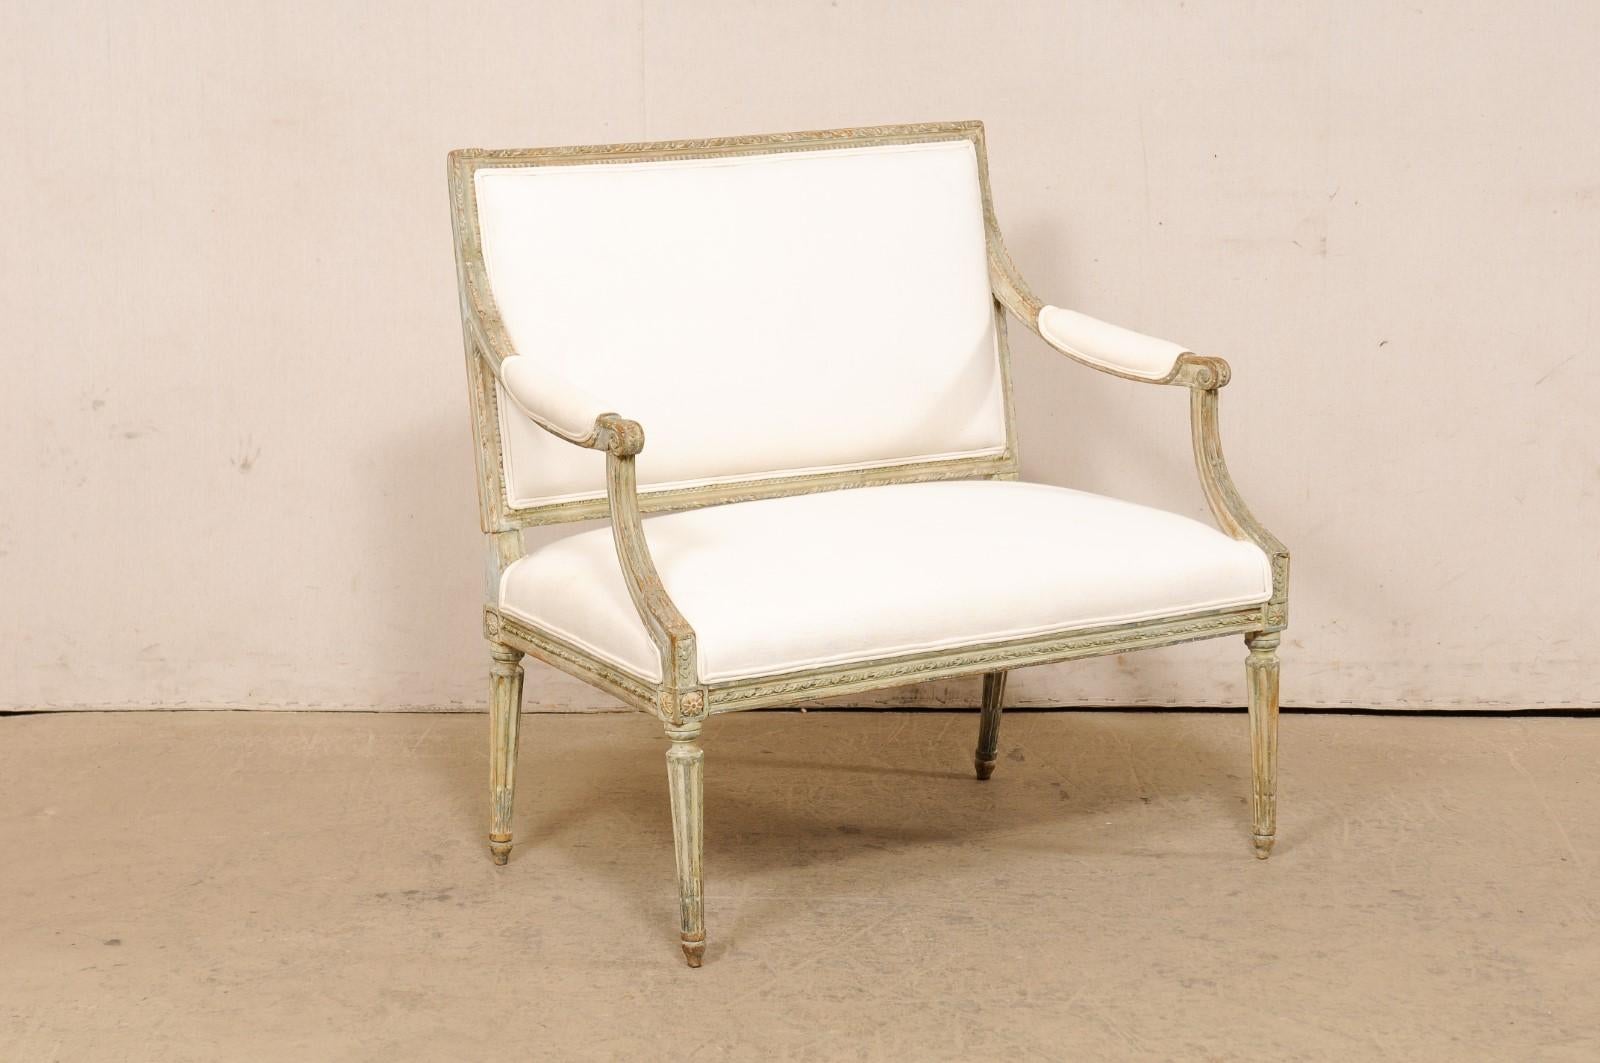 A French Louis XVI style carved-wood and upholstered marquise from the 19th century. This antique chair-and-a-half from France, often referred to as a marquise (a wide fauteuils chair), showcases all the Louis XVI decorative vocabulary with tightly